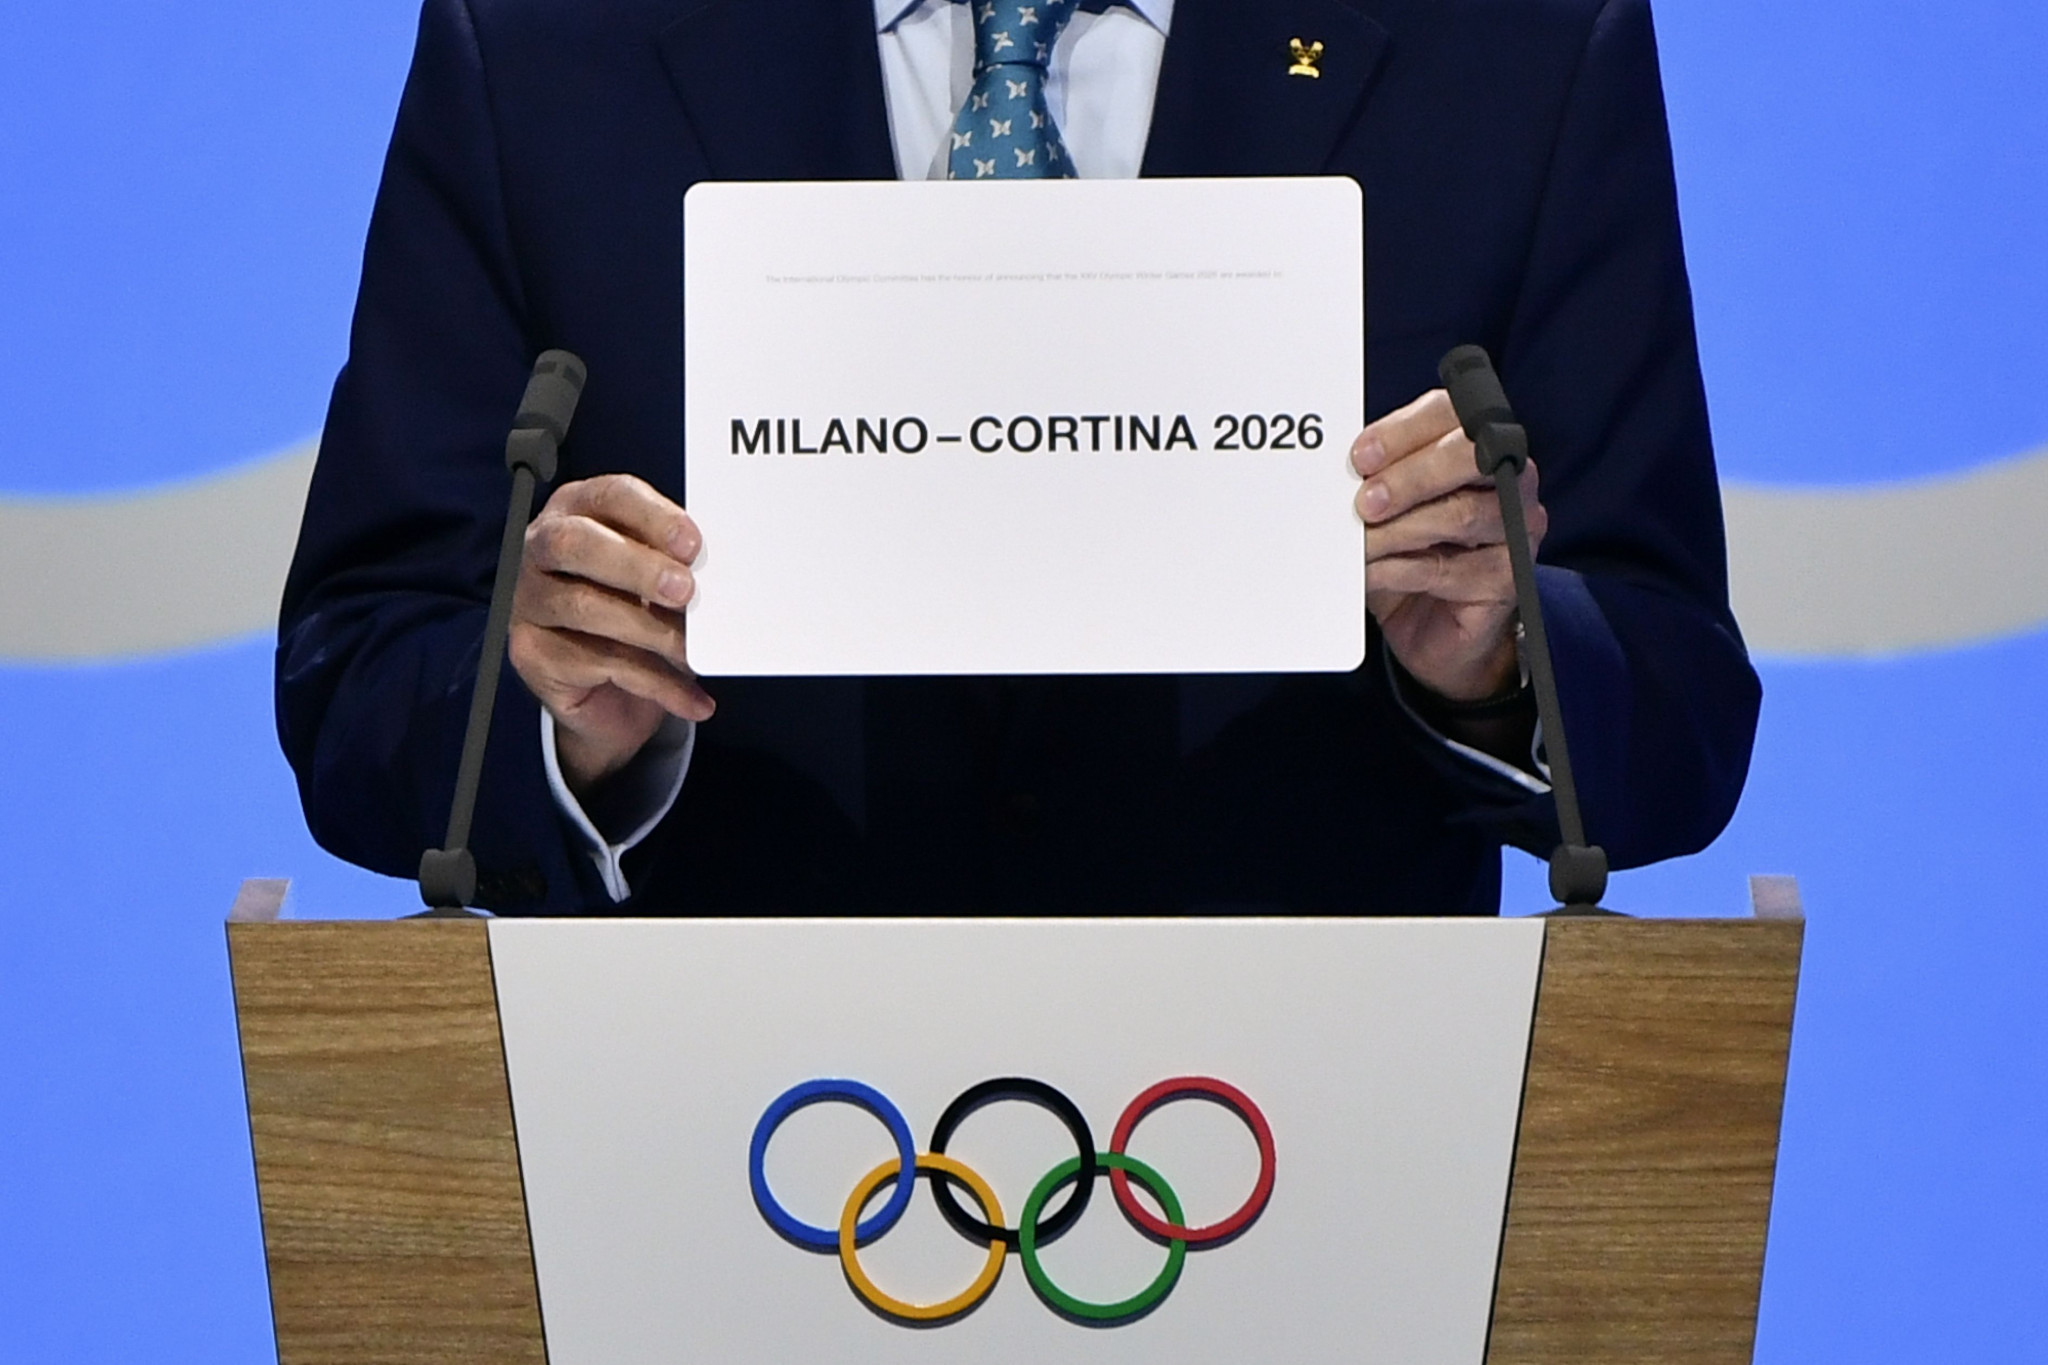 Milan Cortina is set to host the Winter Olympics in 2026 ©Getty Images